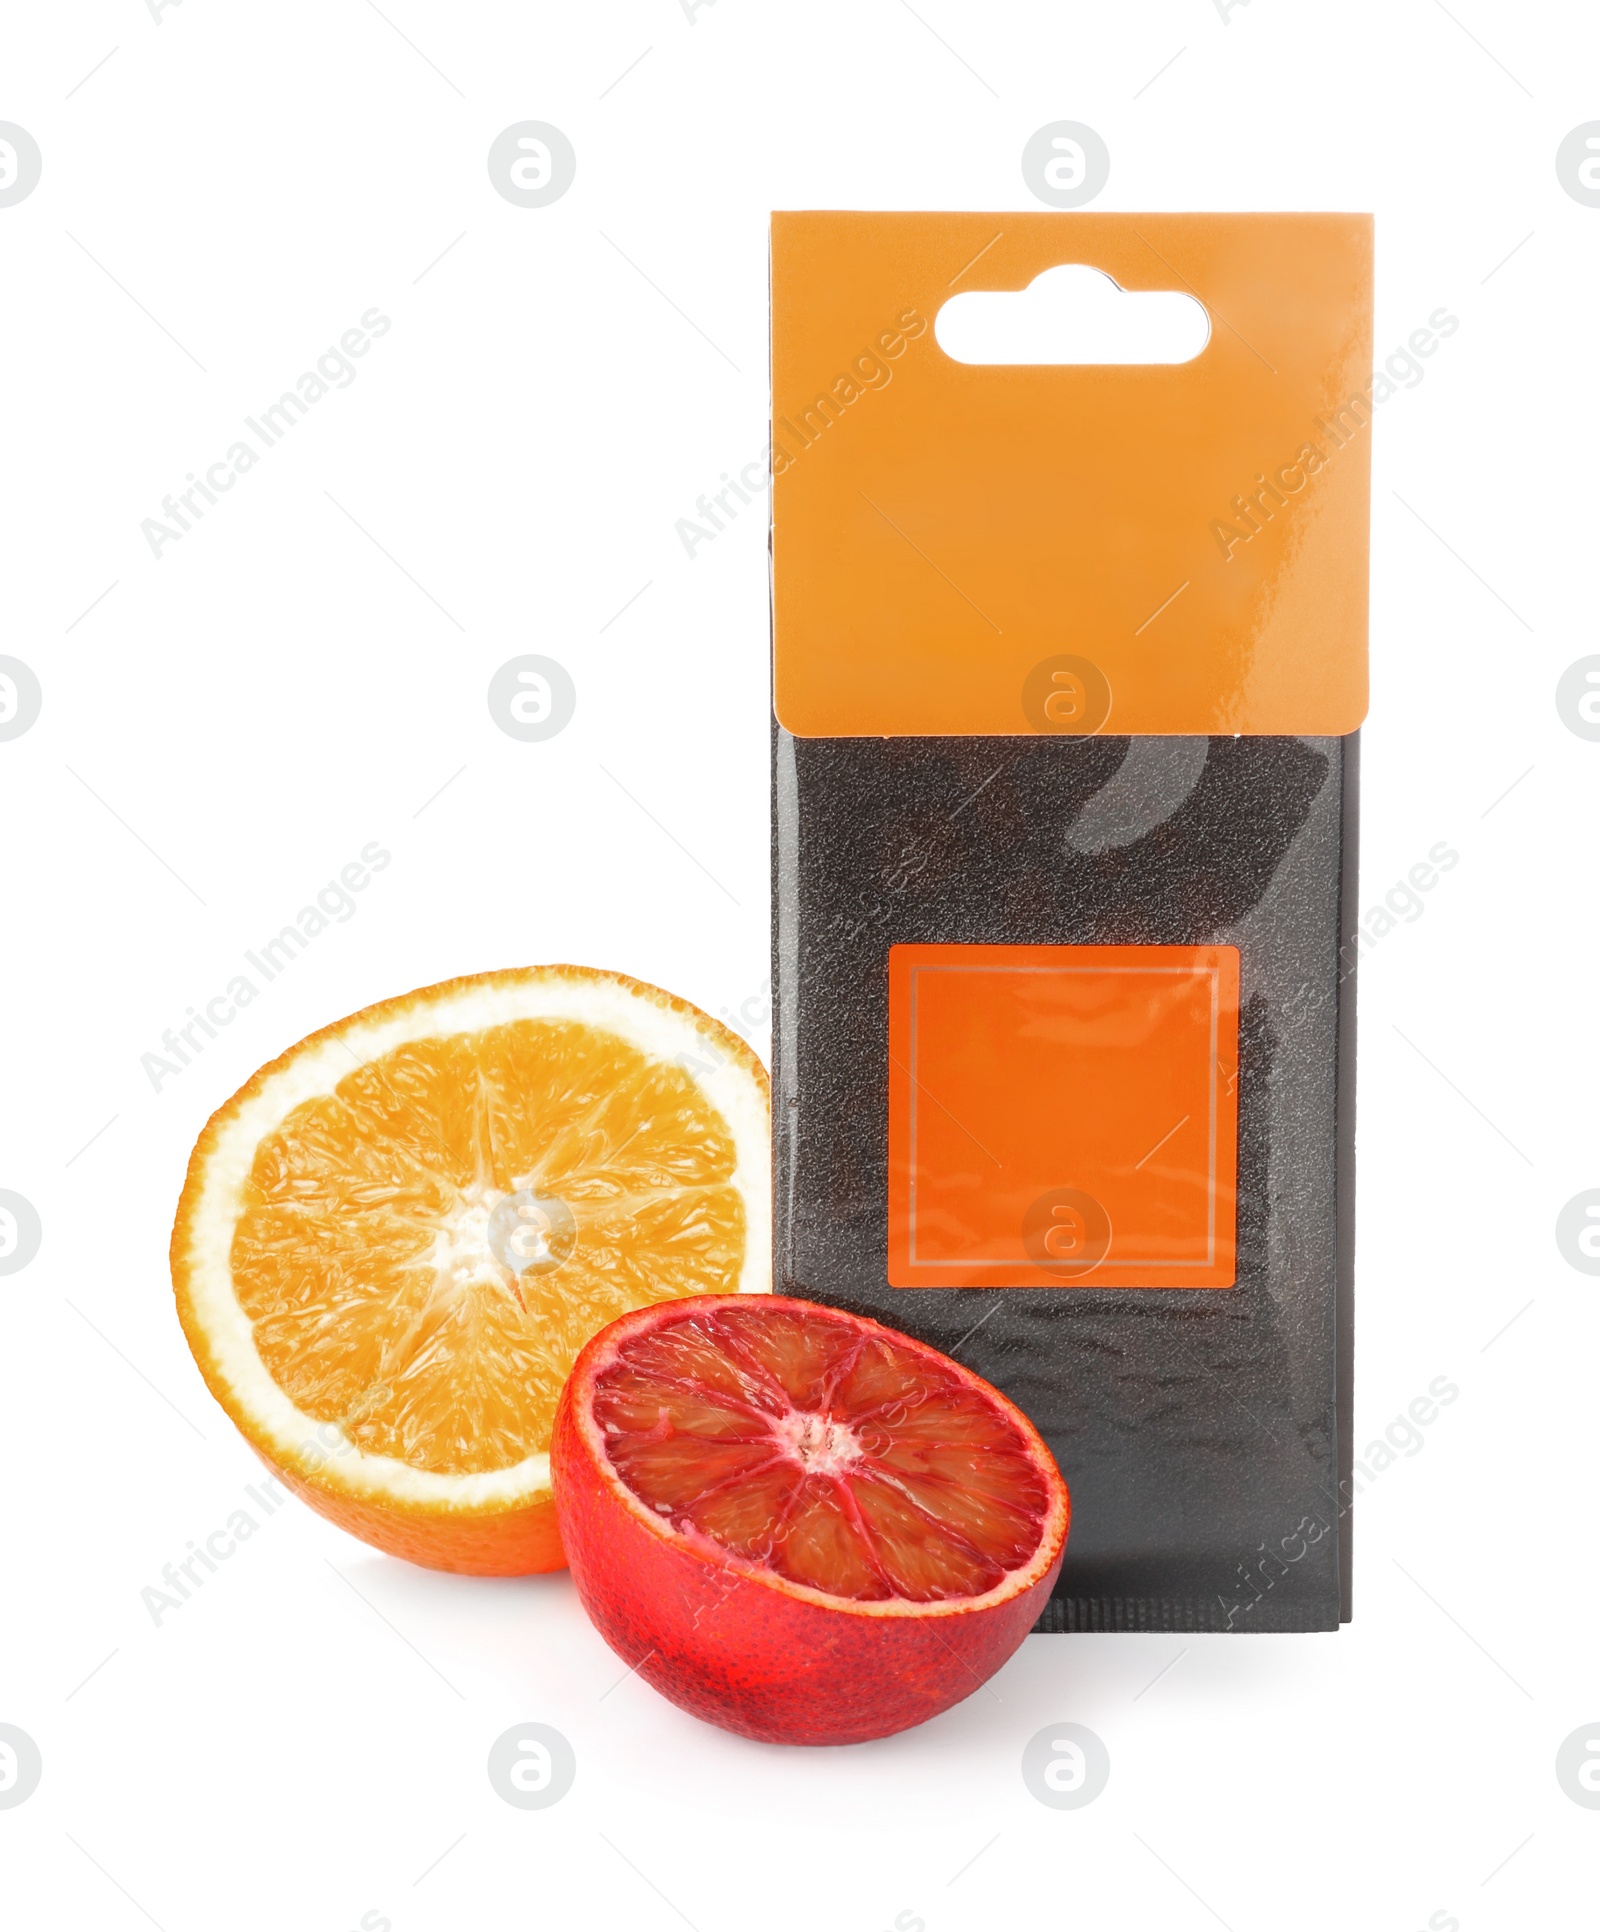 Photo of Scented sachet and halves of different oranges on white background